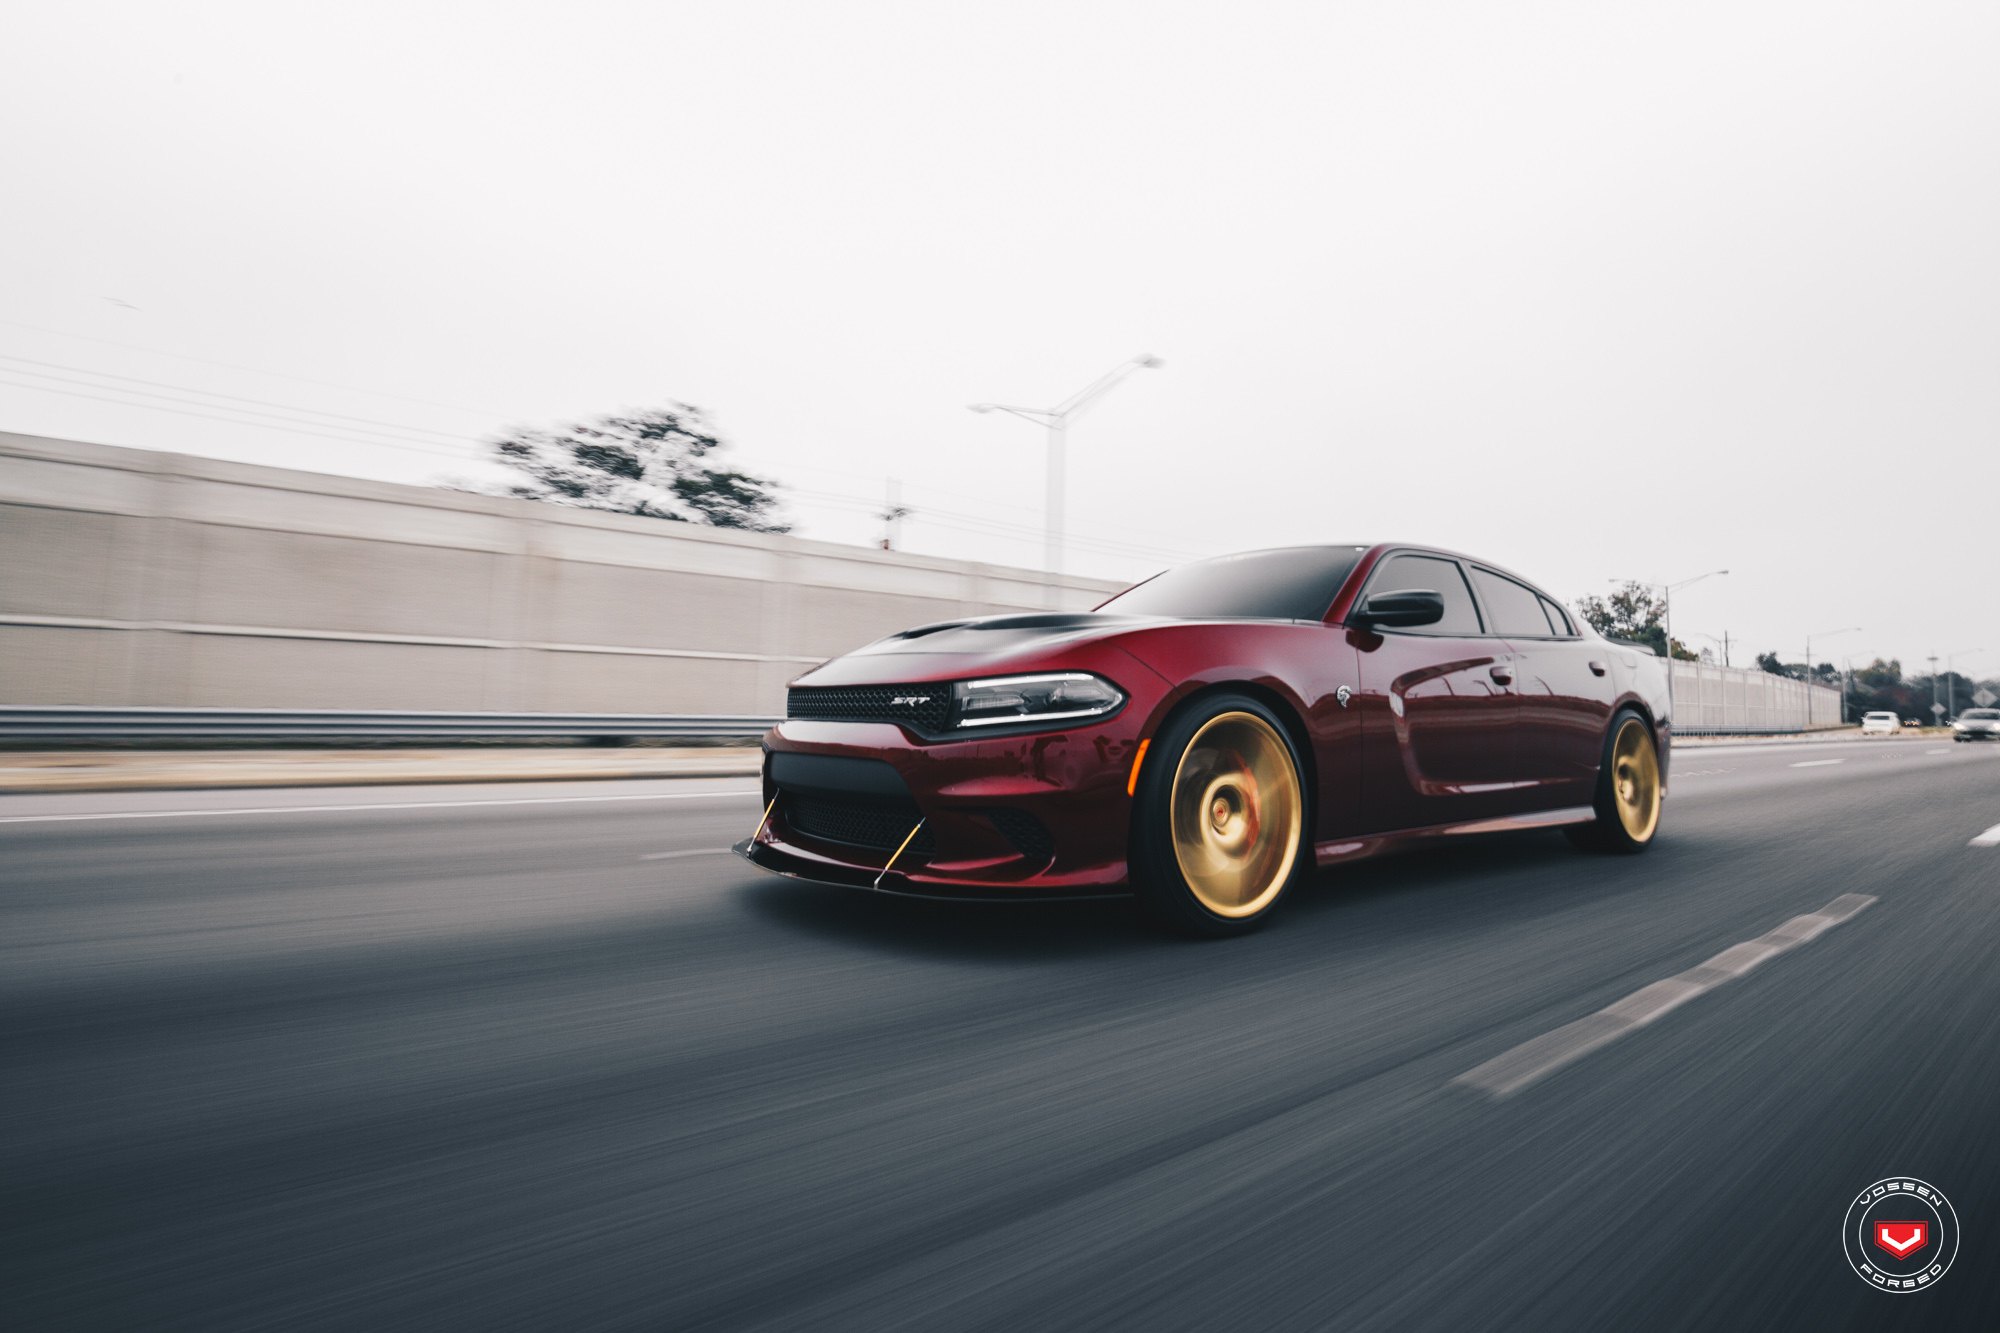 Red Dodge Charger with Gold Forged Vossen Wheels - Photo by Vossen